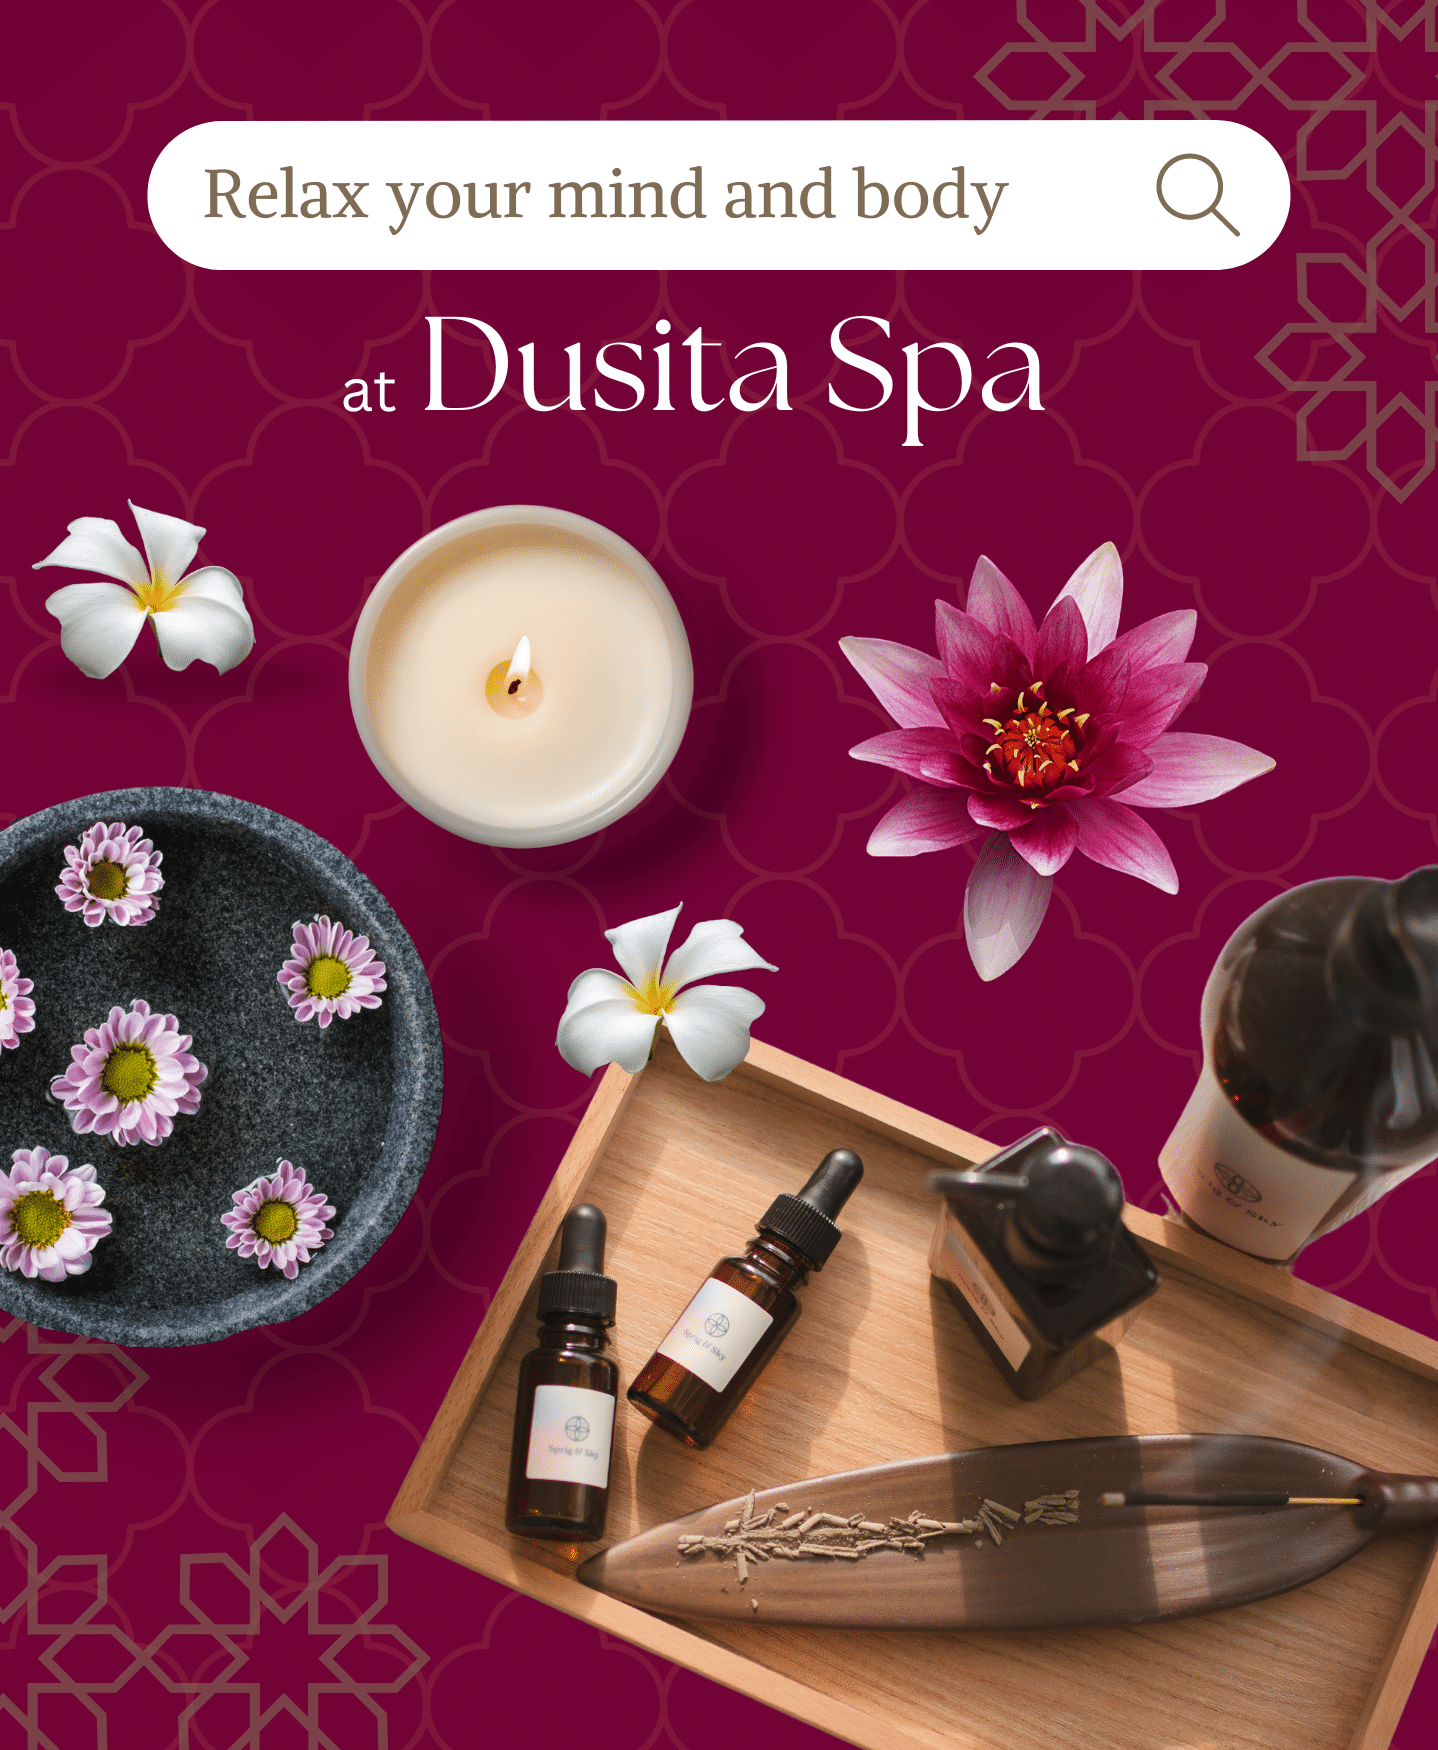 Relax your mind and body at Dusita Spa, Koh Samui